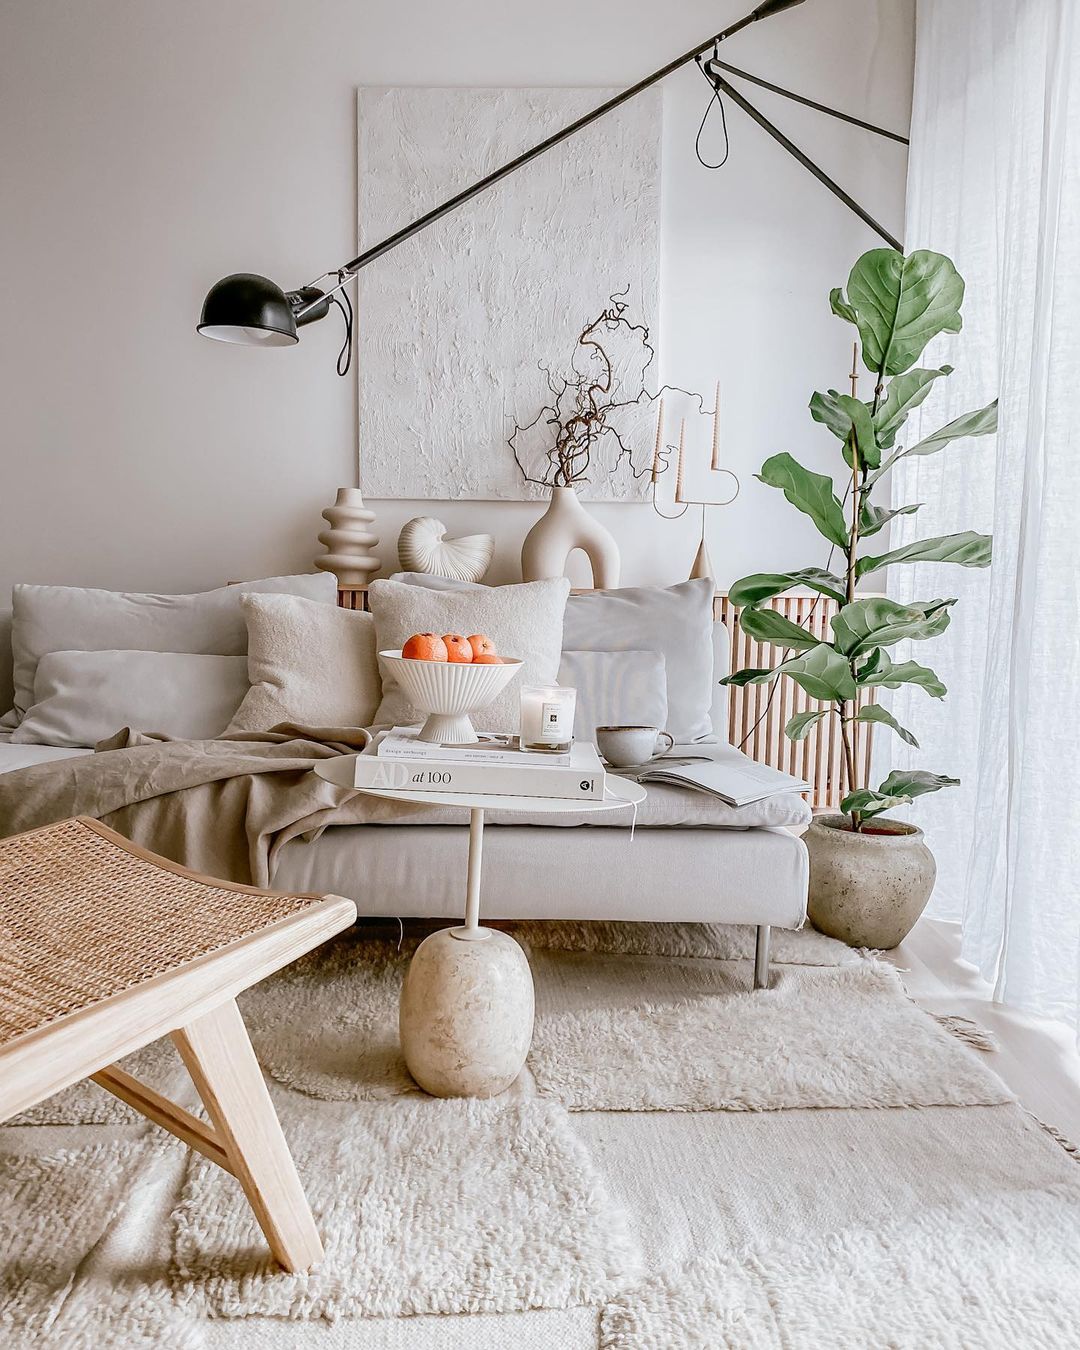 5 Common Mistakes to Avoid When Decorating a Scandinavian Living Room